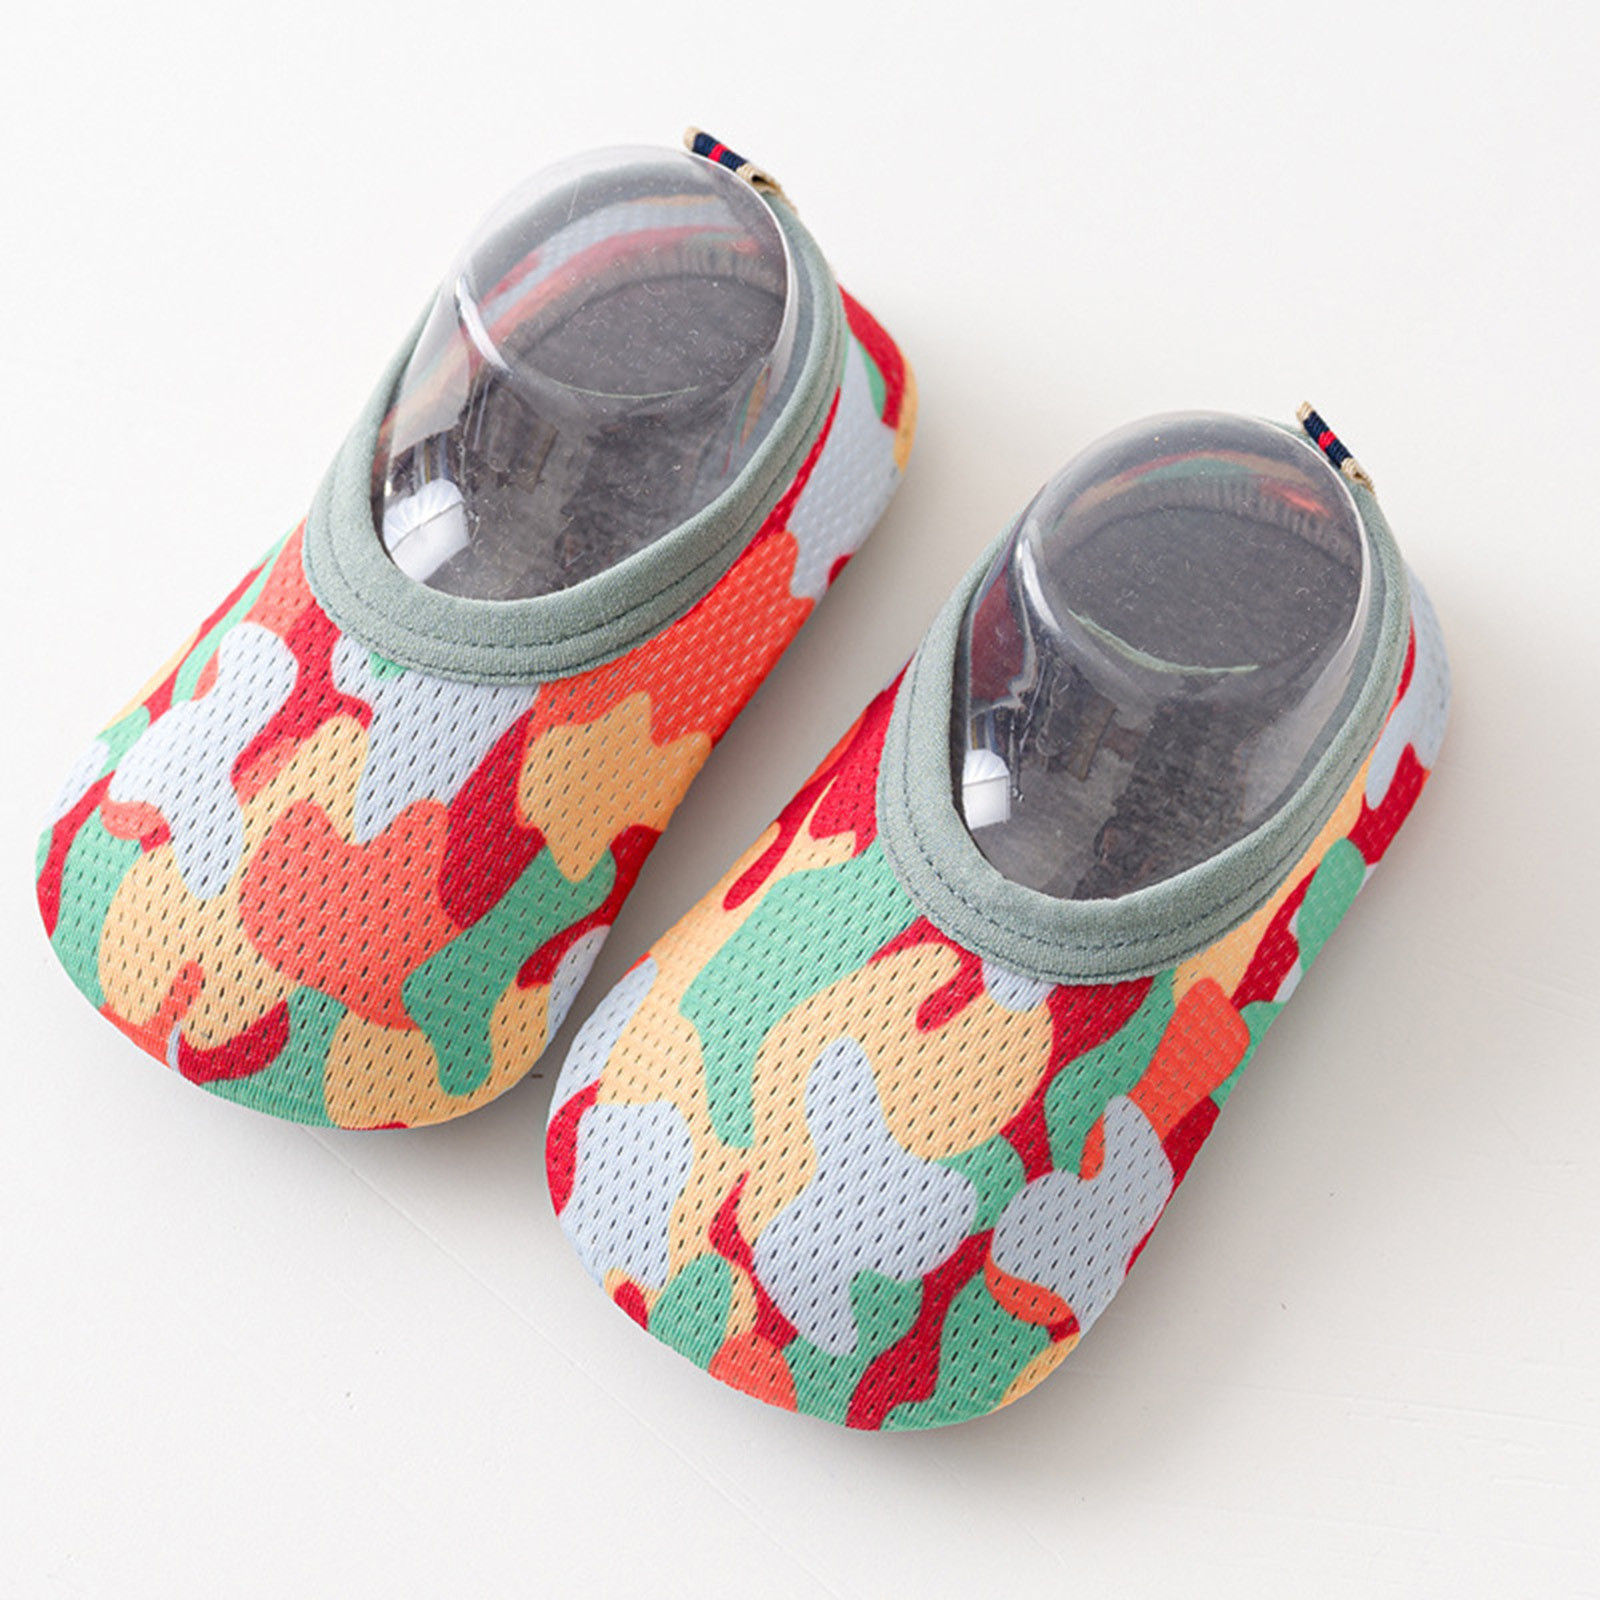 XINSHIDE Shoes Camouflage Kids Socks Non-Slip Aqua Shoes Barefoot Floor Socks The Boys Baby Shoes Casual Baby Shoes - image 4 of 4